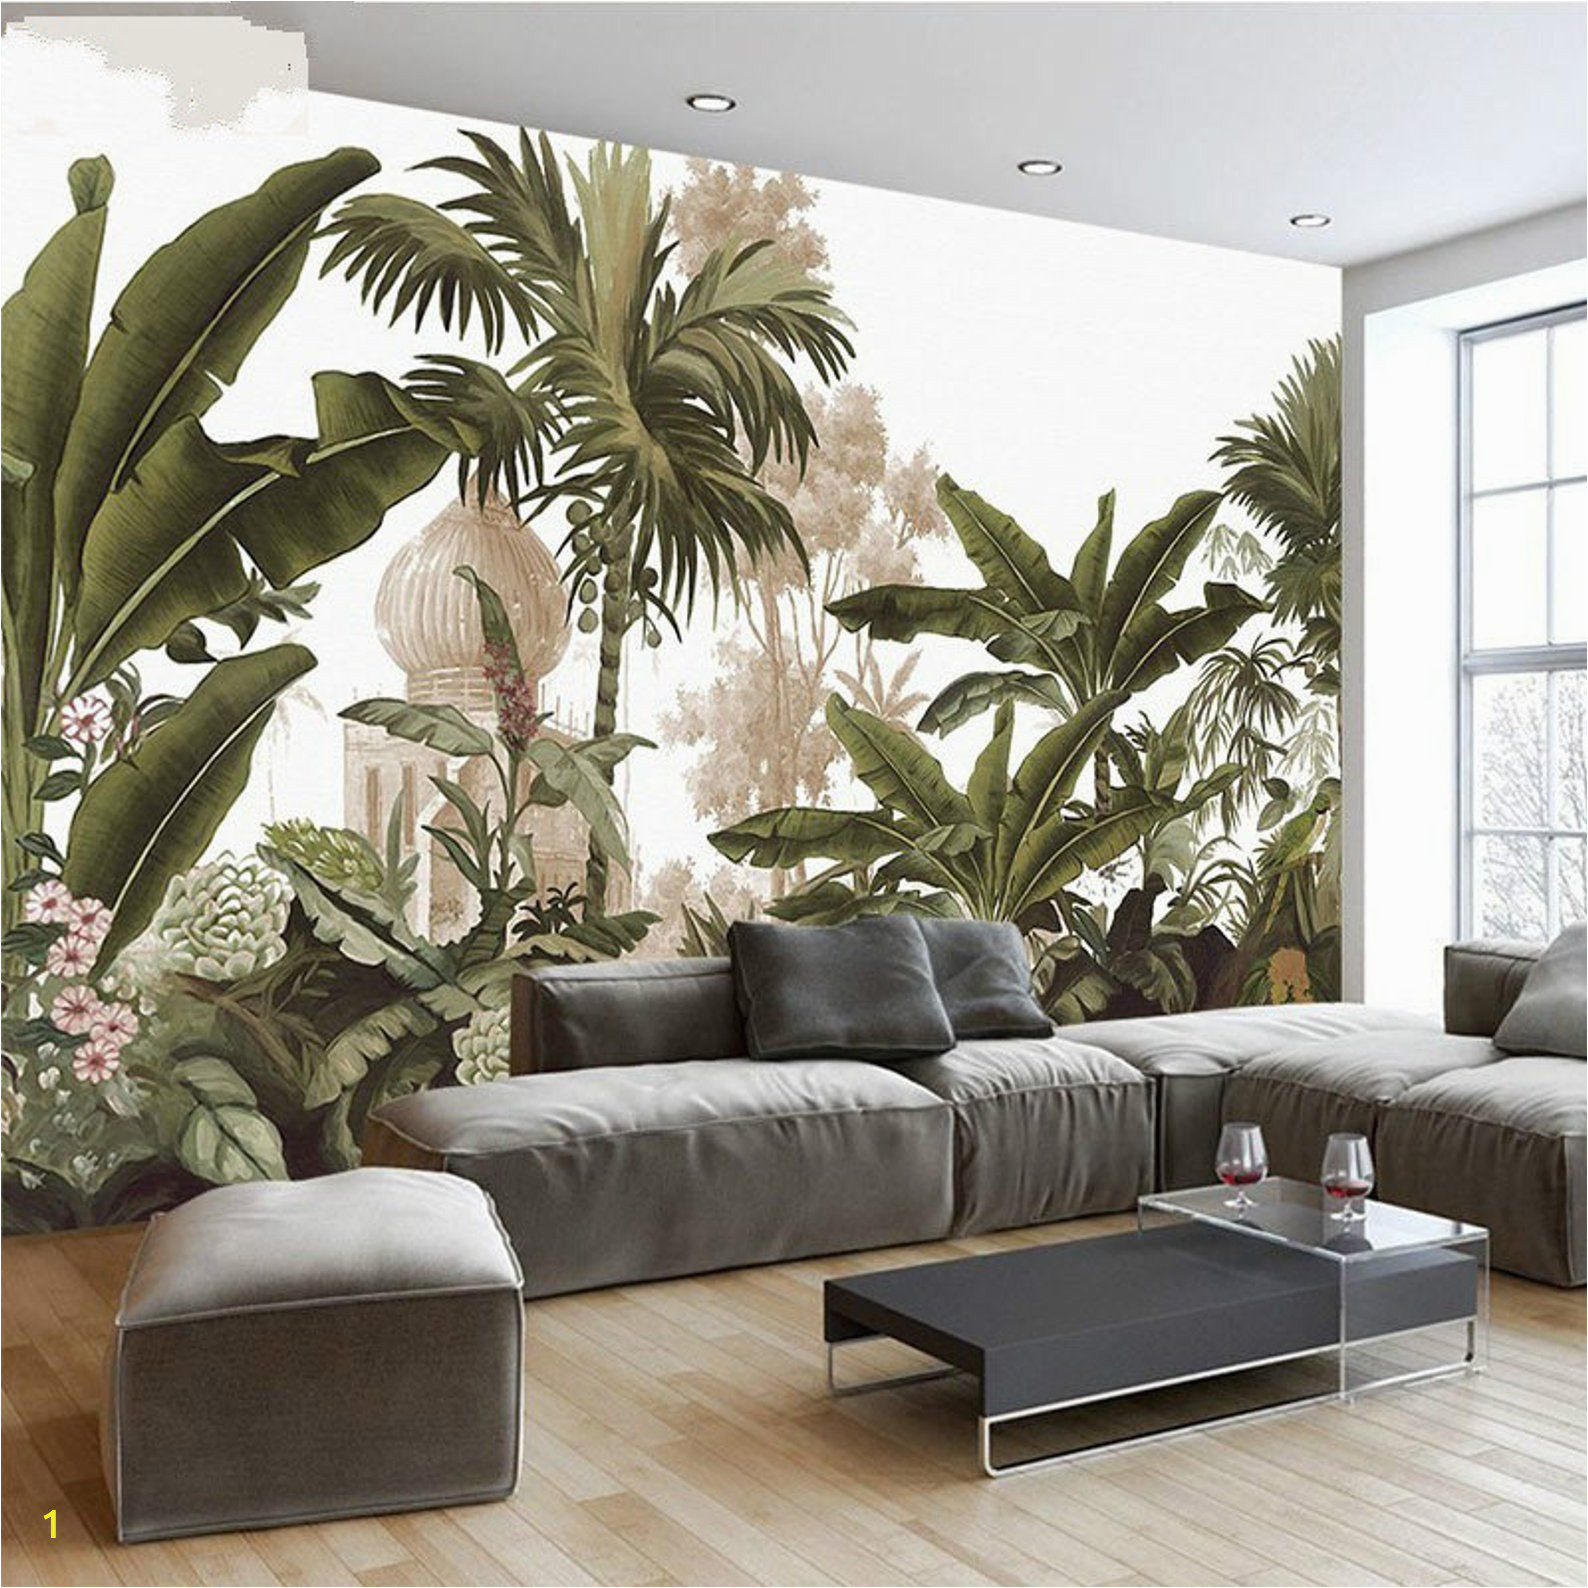 Forest Wall Decal Mural Hand Painted Tropical Rainforest forest Wallpaper Wall Mural